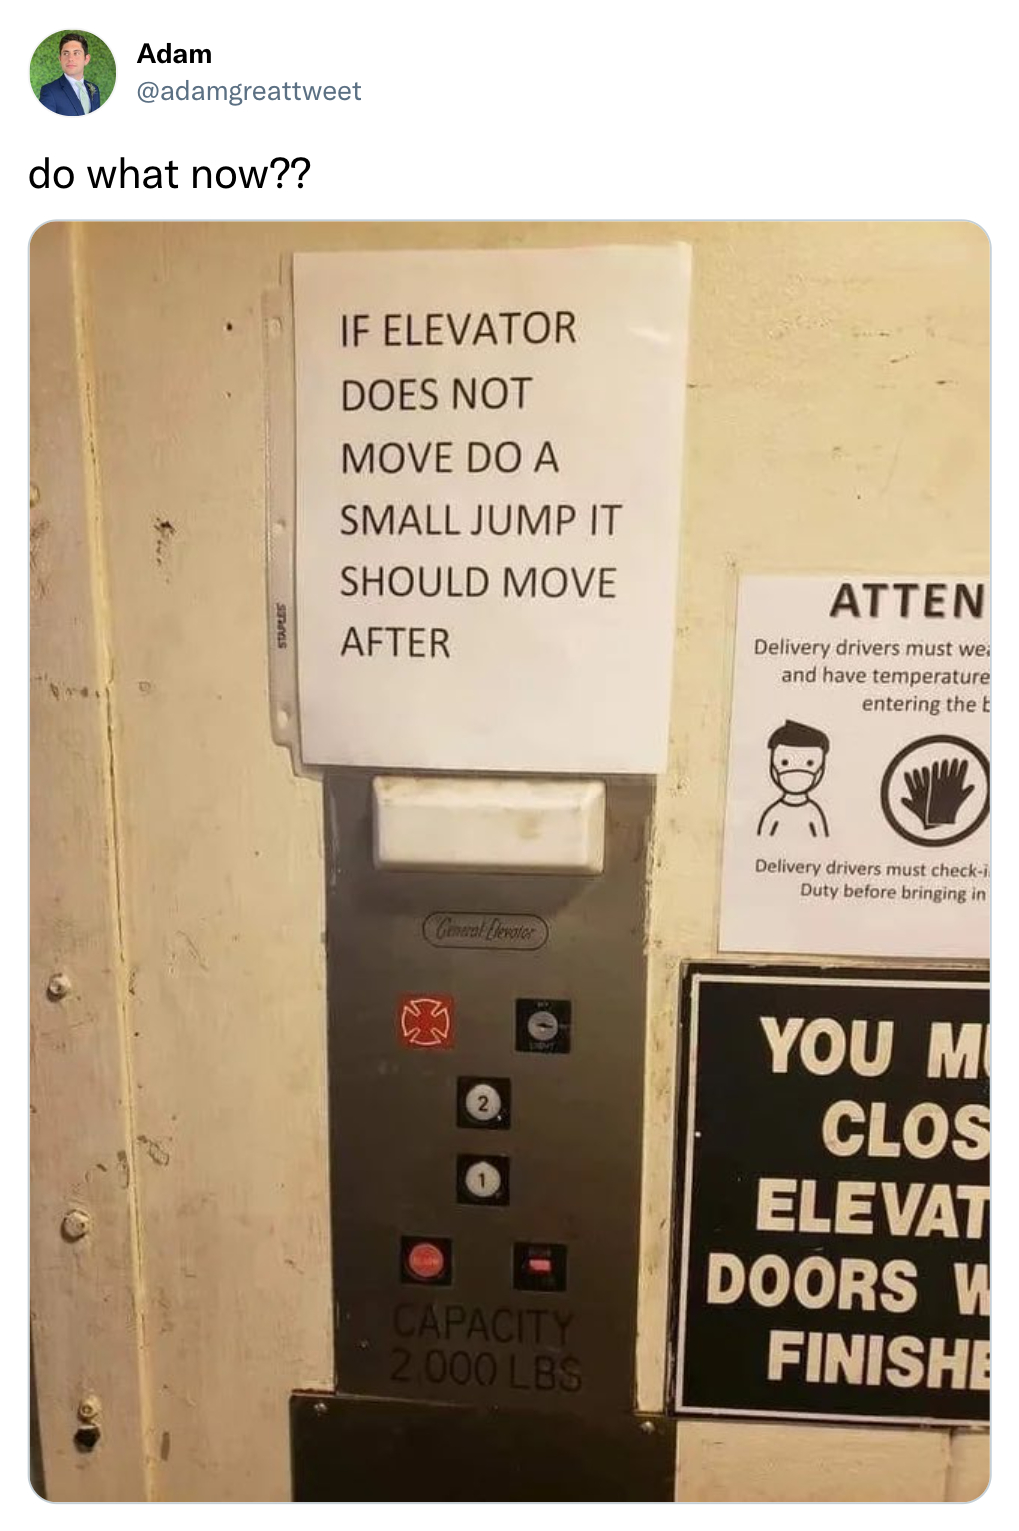 funny tweets - percussive maintenance - Adam Badamgreatweet do what now?? If Elevator Does Not Move Do A Small Jump It Should Move After Atten Divery drivers must we and have temperature enter the Dry But beforenin You M Clos Elevat Doors W Finishe Lapaci